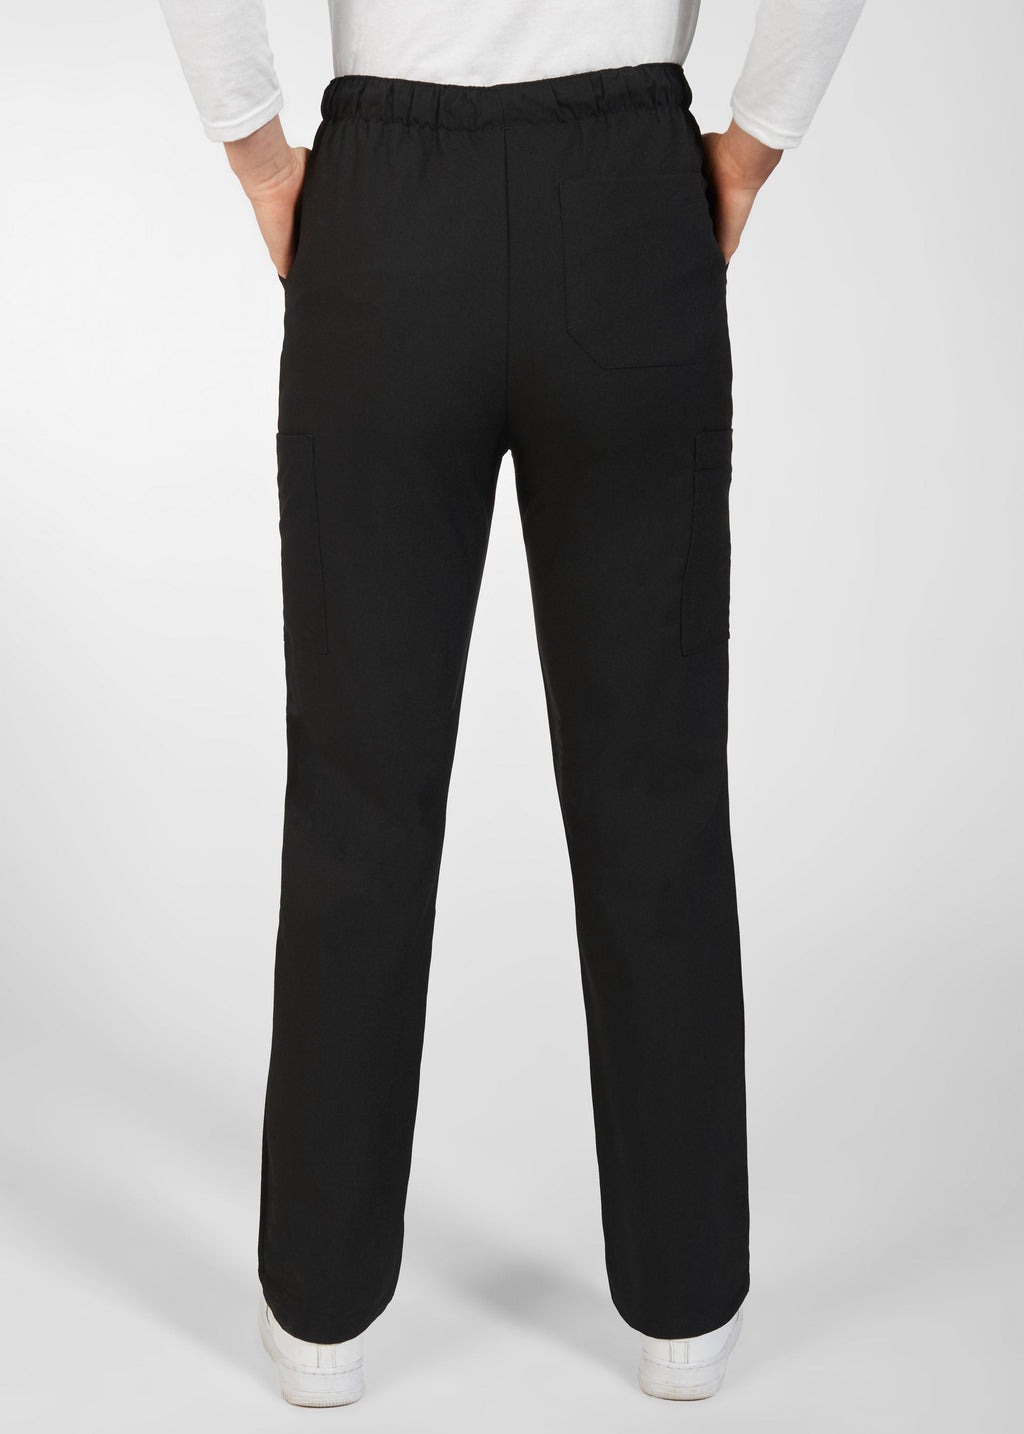 Product - MOBB Clearance The Jesse Scrub Pant